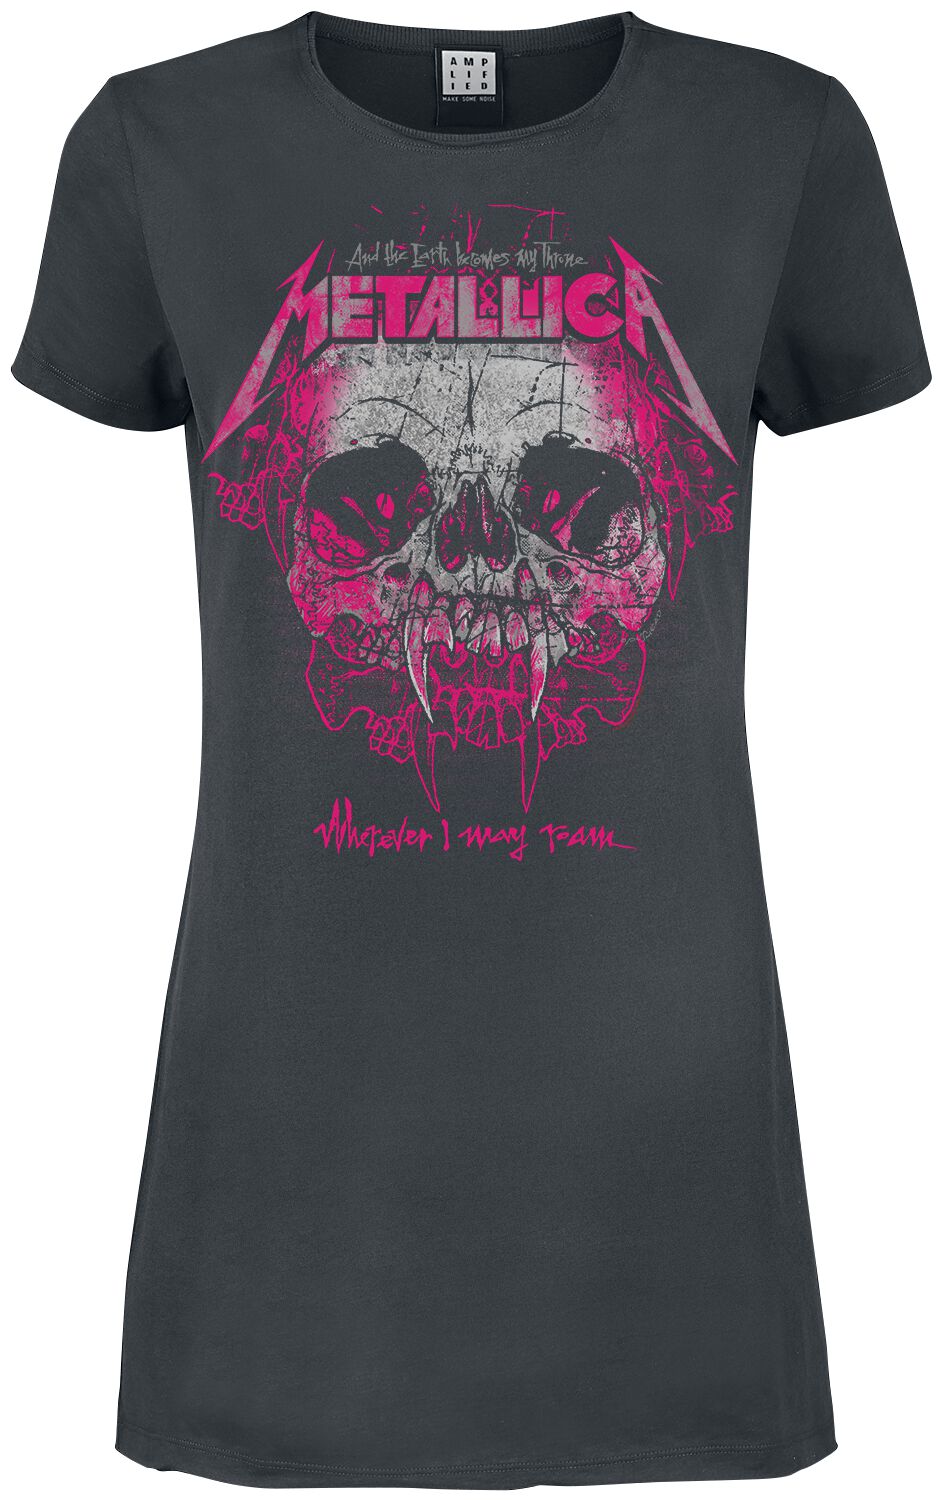 Robe courte de Metallica - Amplified Collection - Wherever I May Roam Pink Ink - XS à XXL - pour Fem